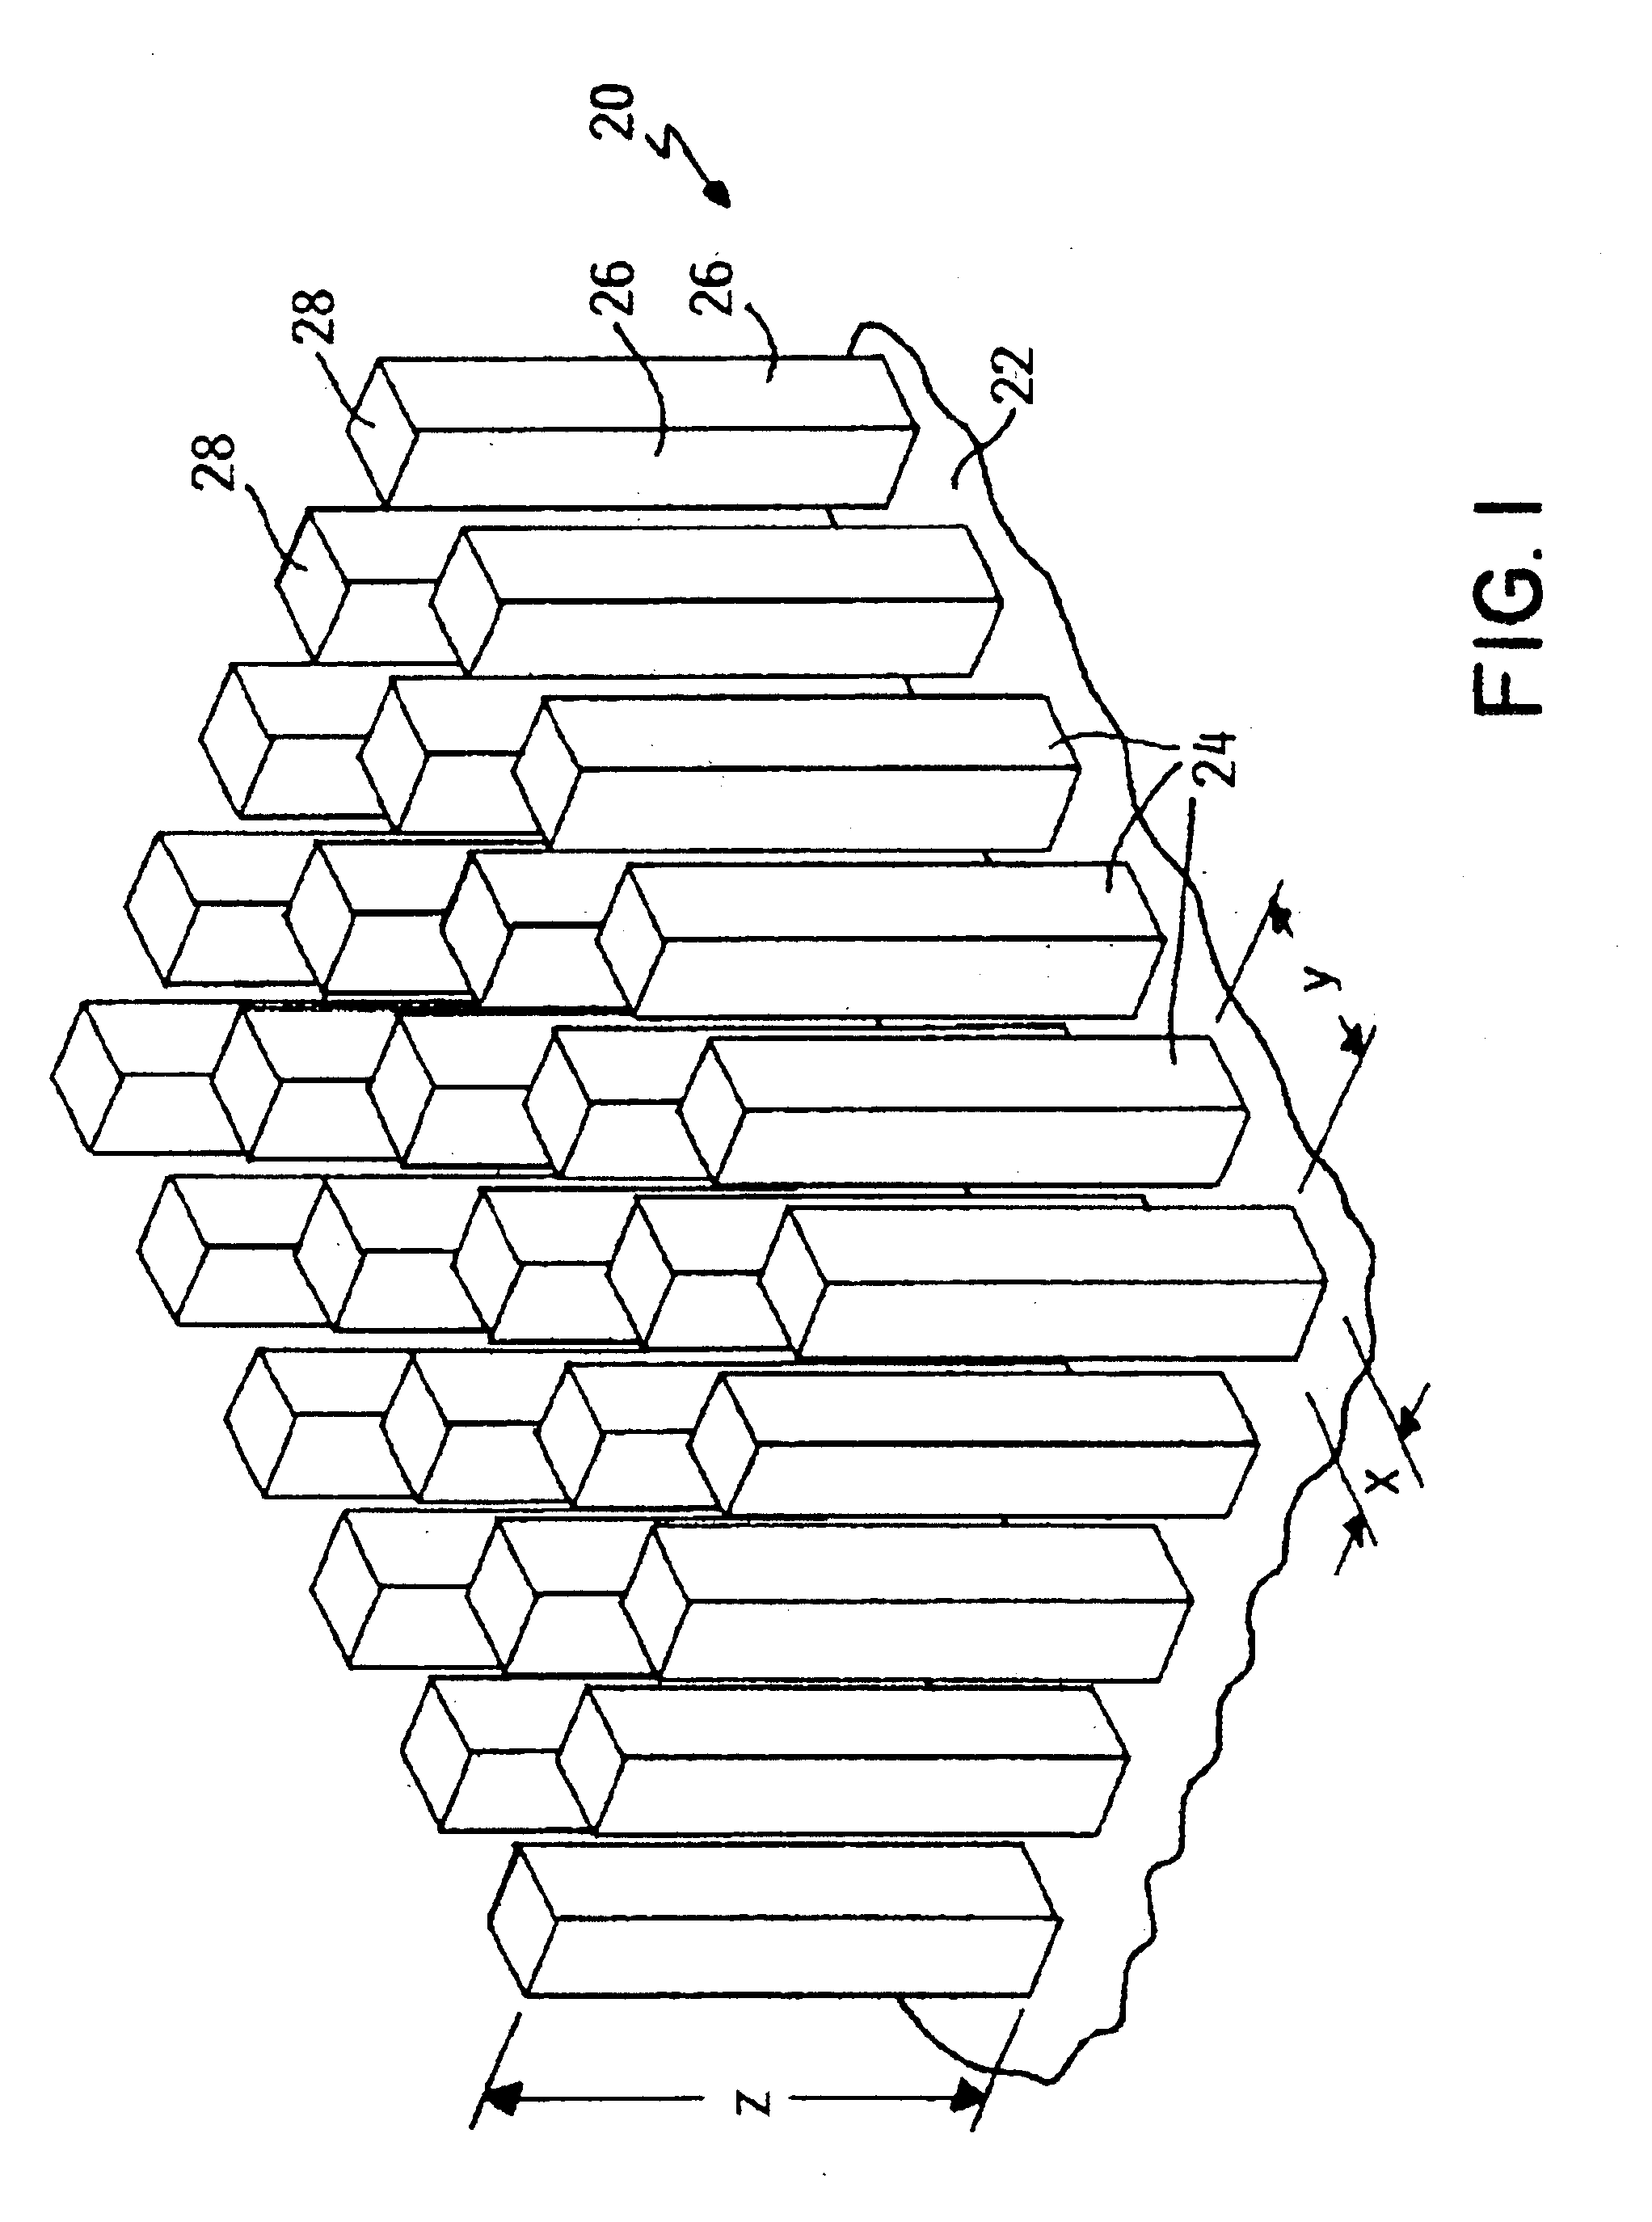 Microfluidic device with ultraphobic surfaces